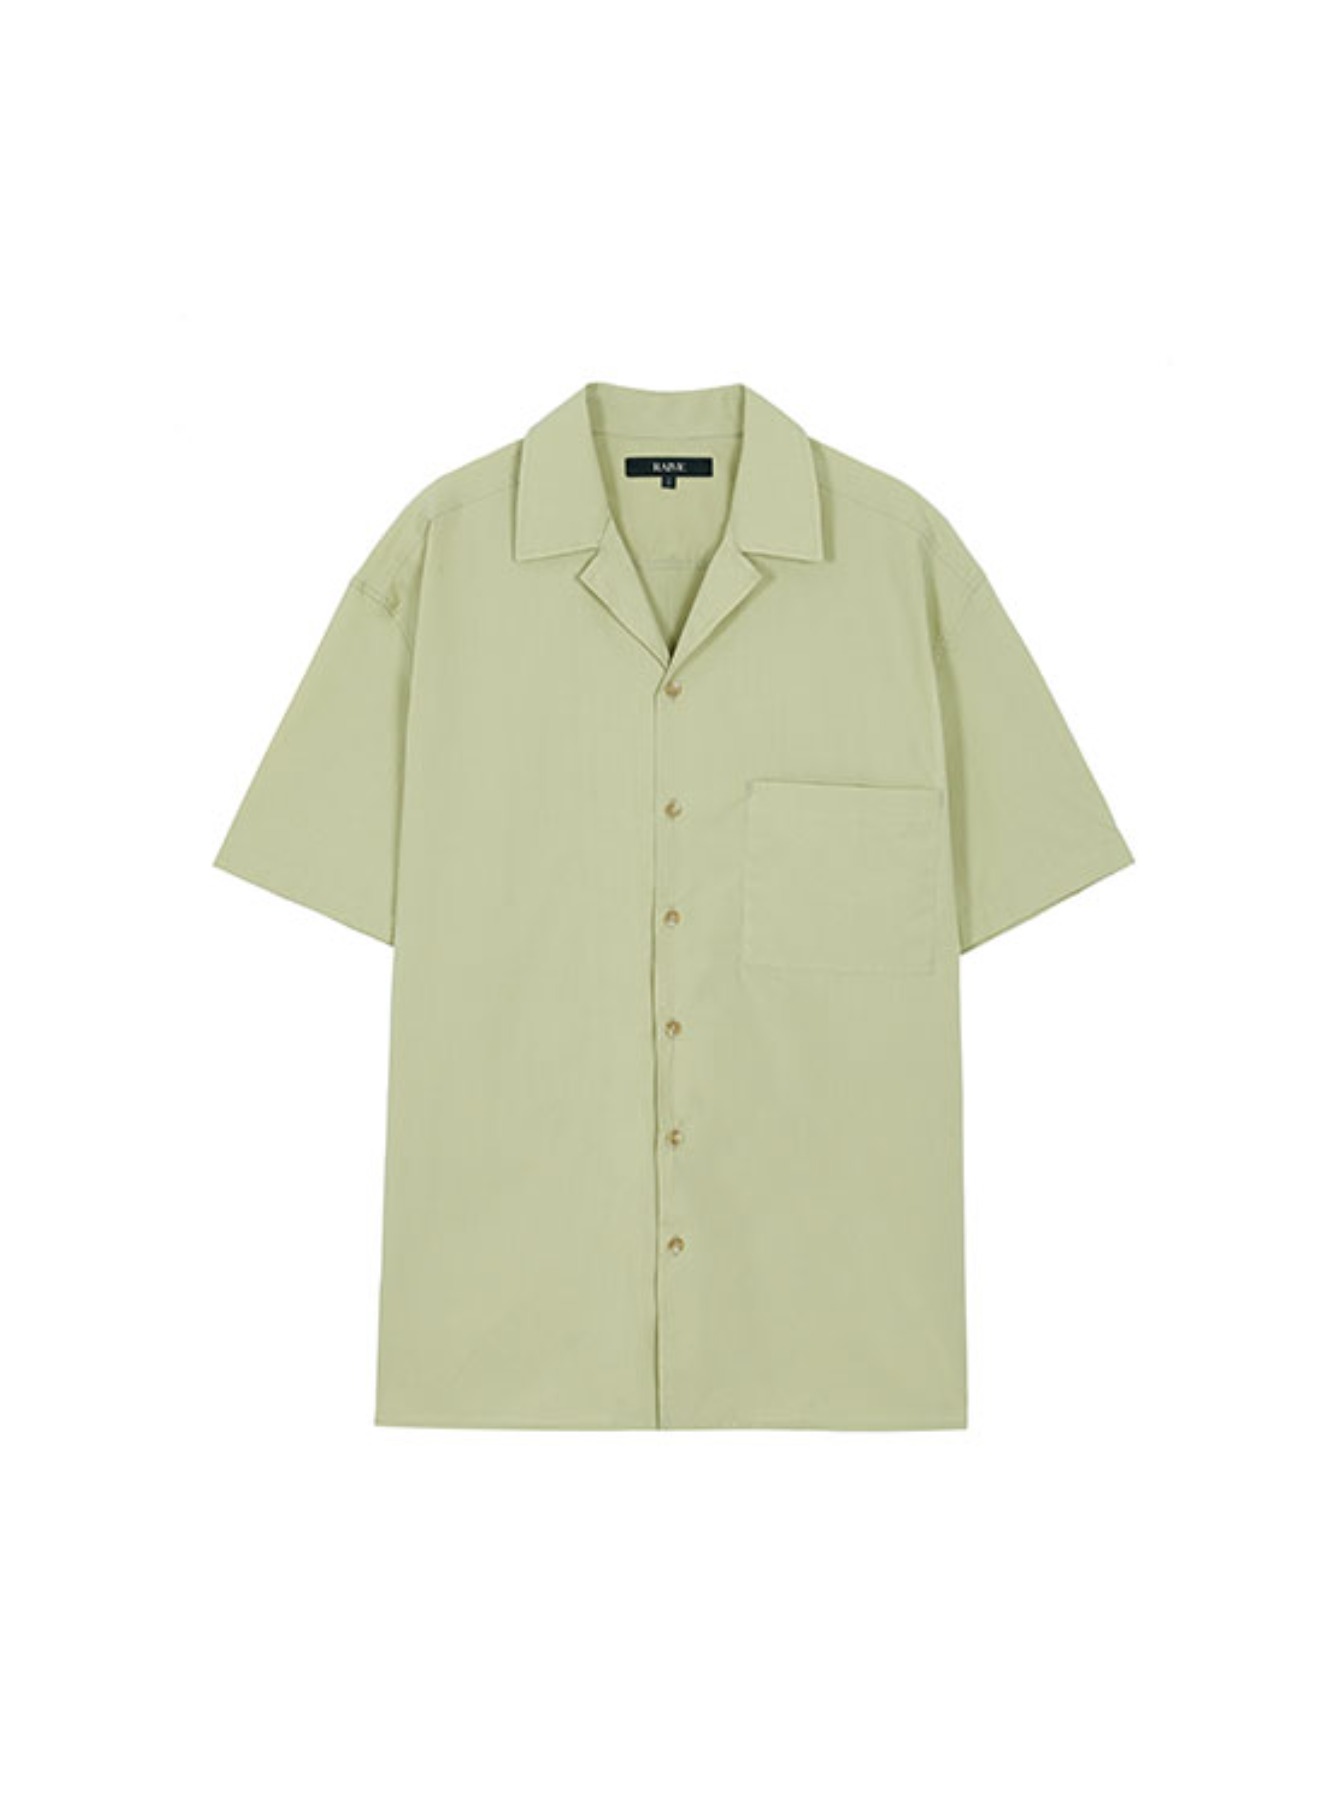 Solid Collar Shirt in Olive VW2MB801-41